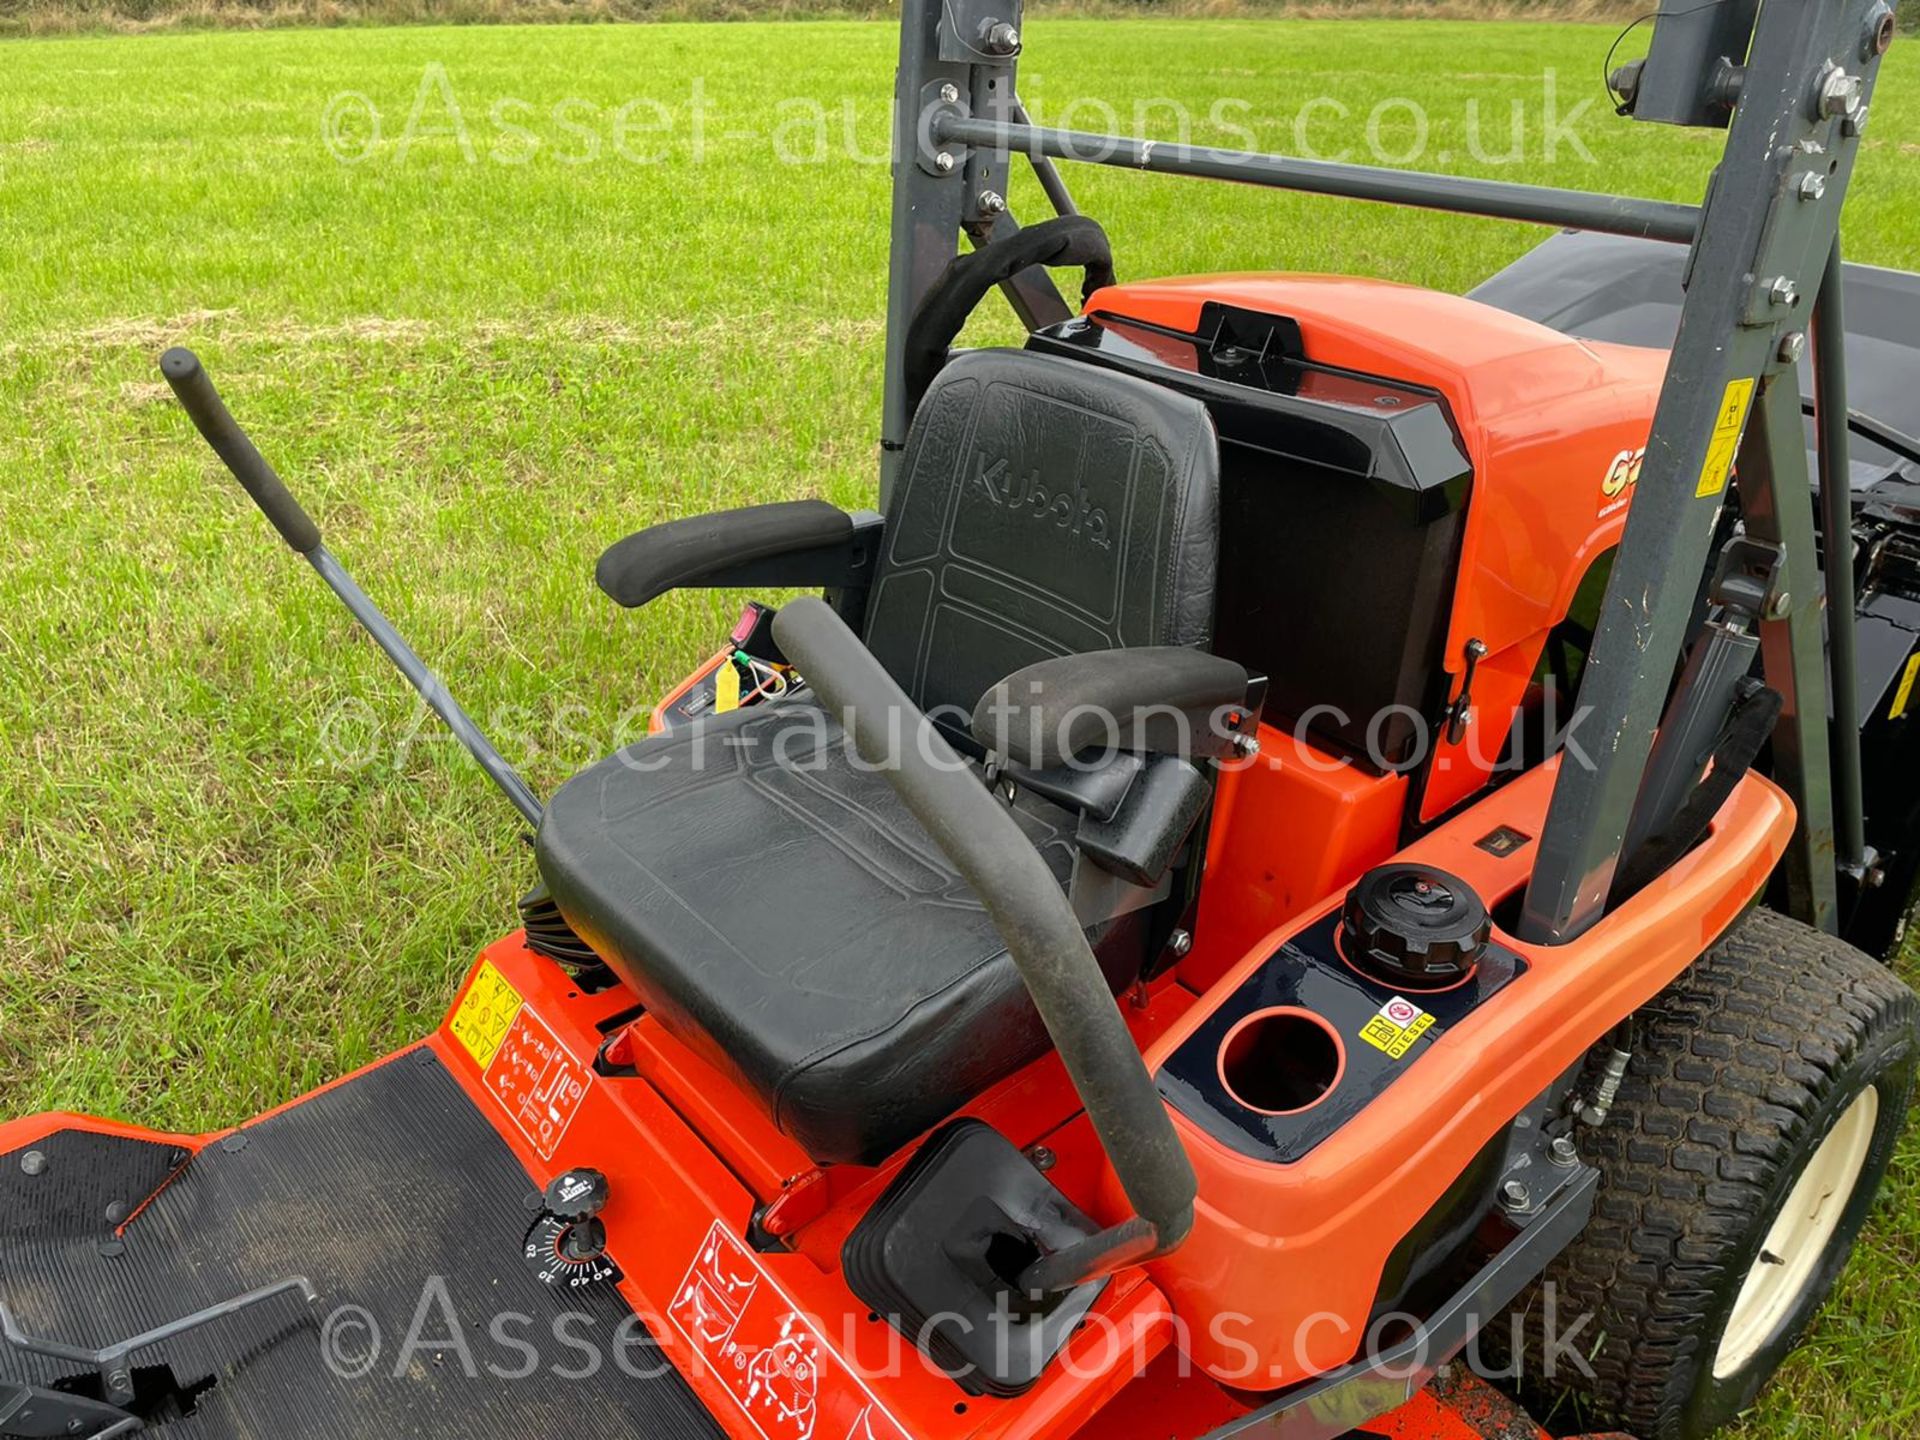 2015 KUBOTA GZD21 HIGH TIP ZERO TURN MOWER, RUNS, DRIVES CUTS AND COLLECTS WELL *PLUS VAT* - Image 12 of 13